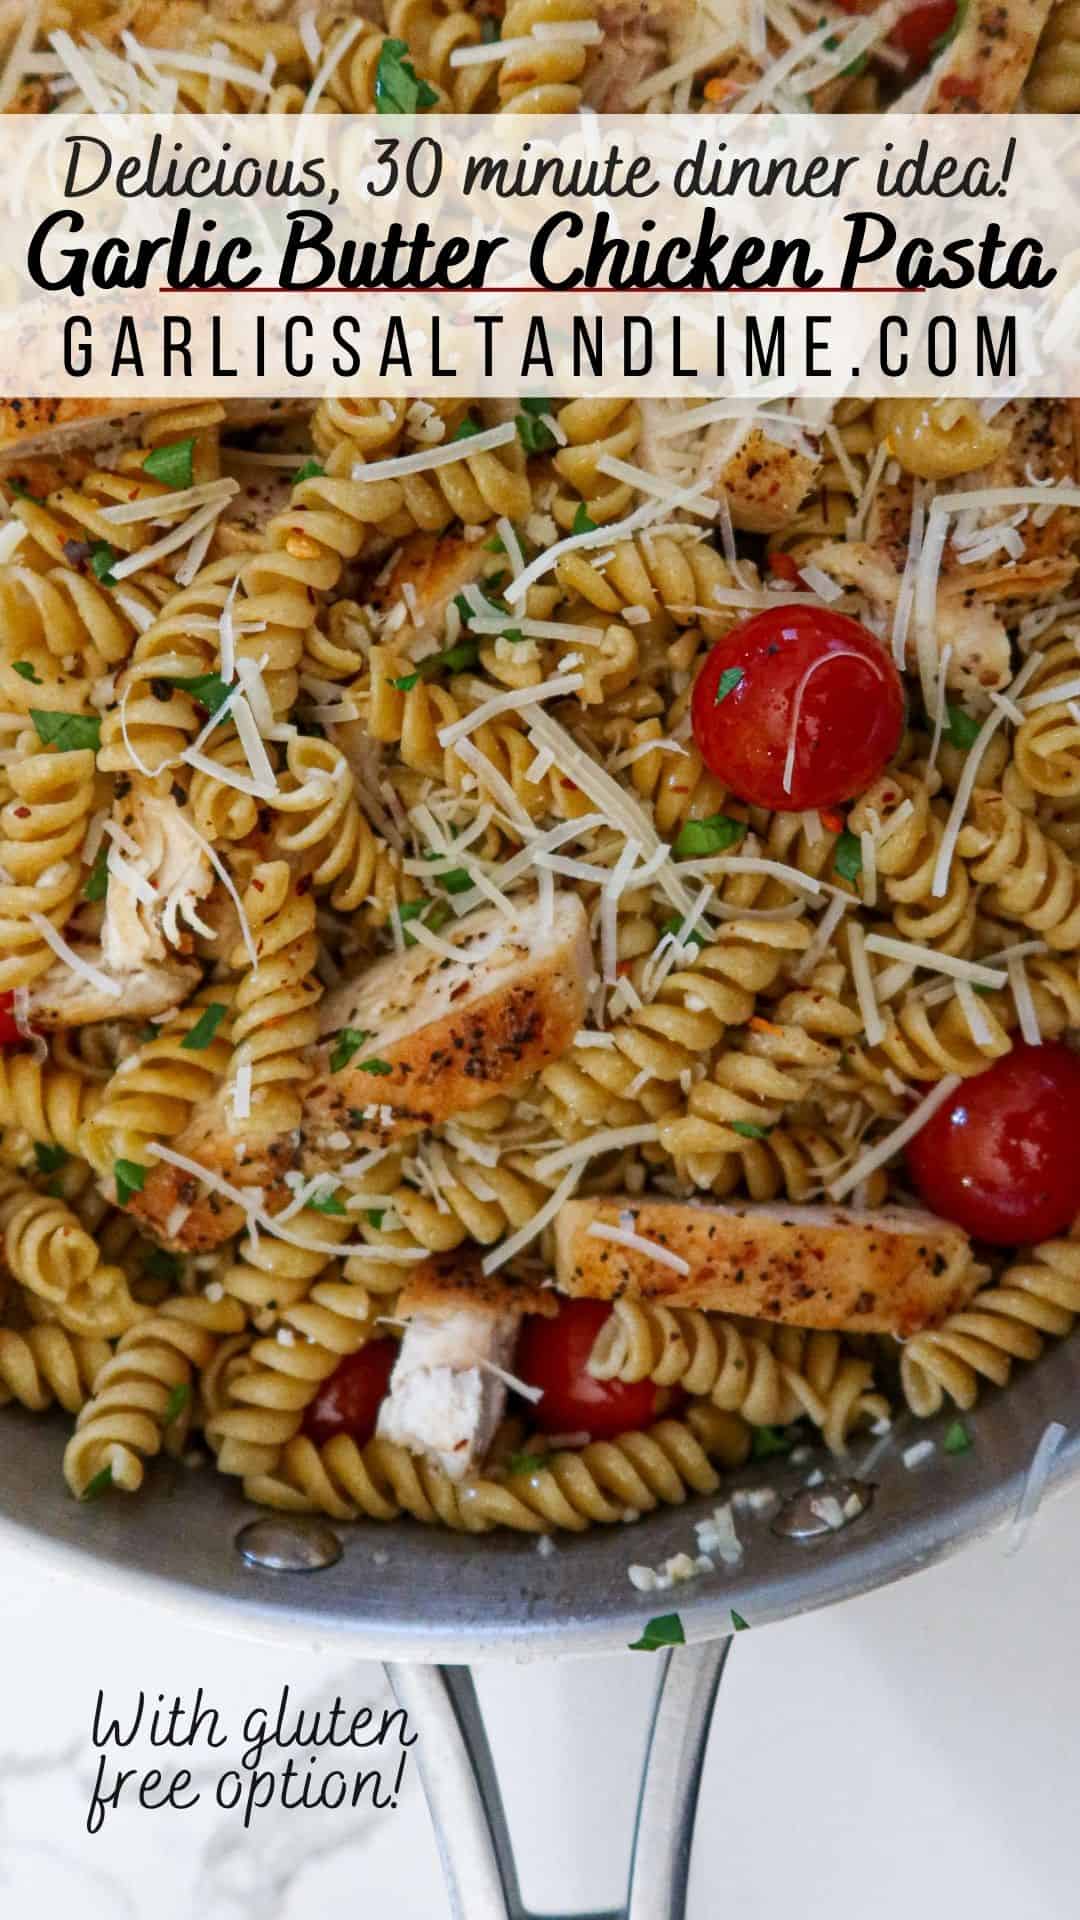 Garlic butter chicken pasta with text overlay for Pinterest.